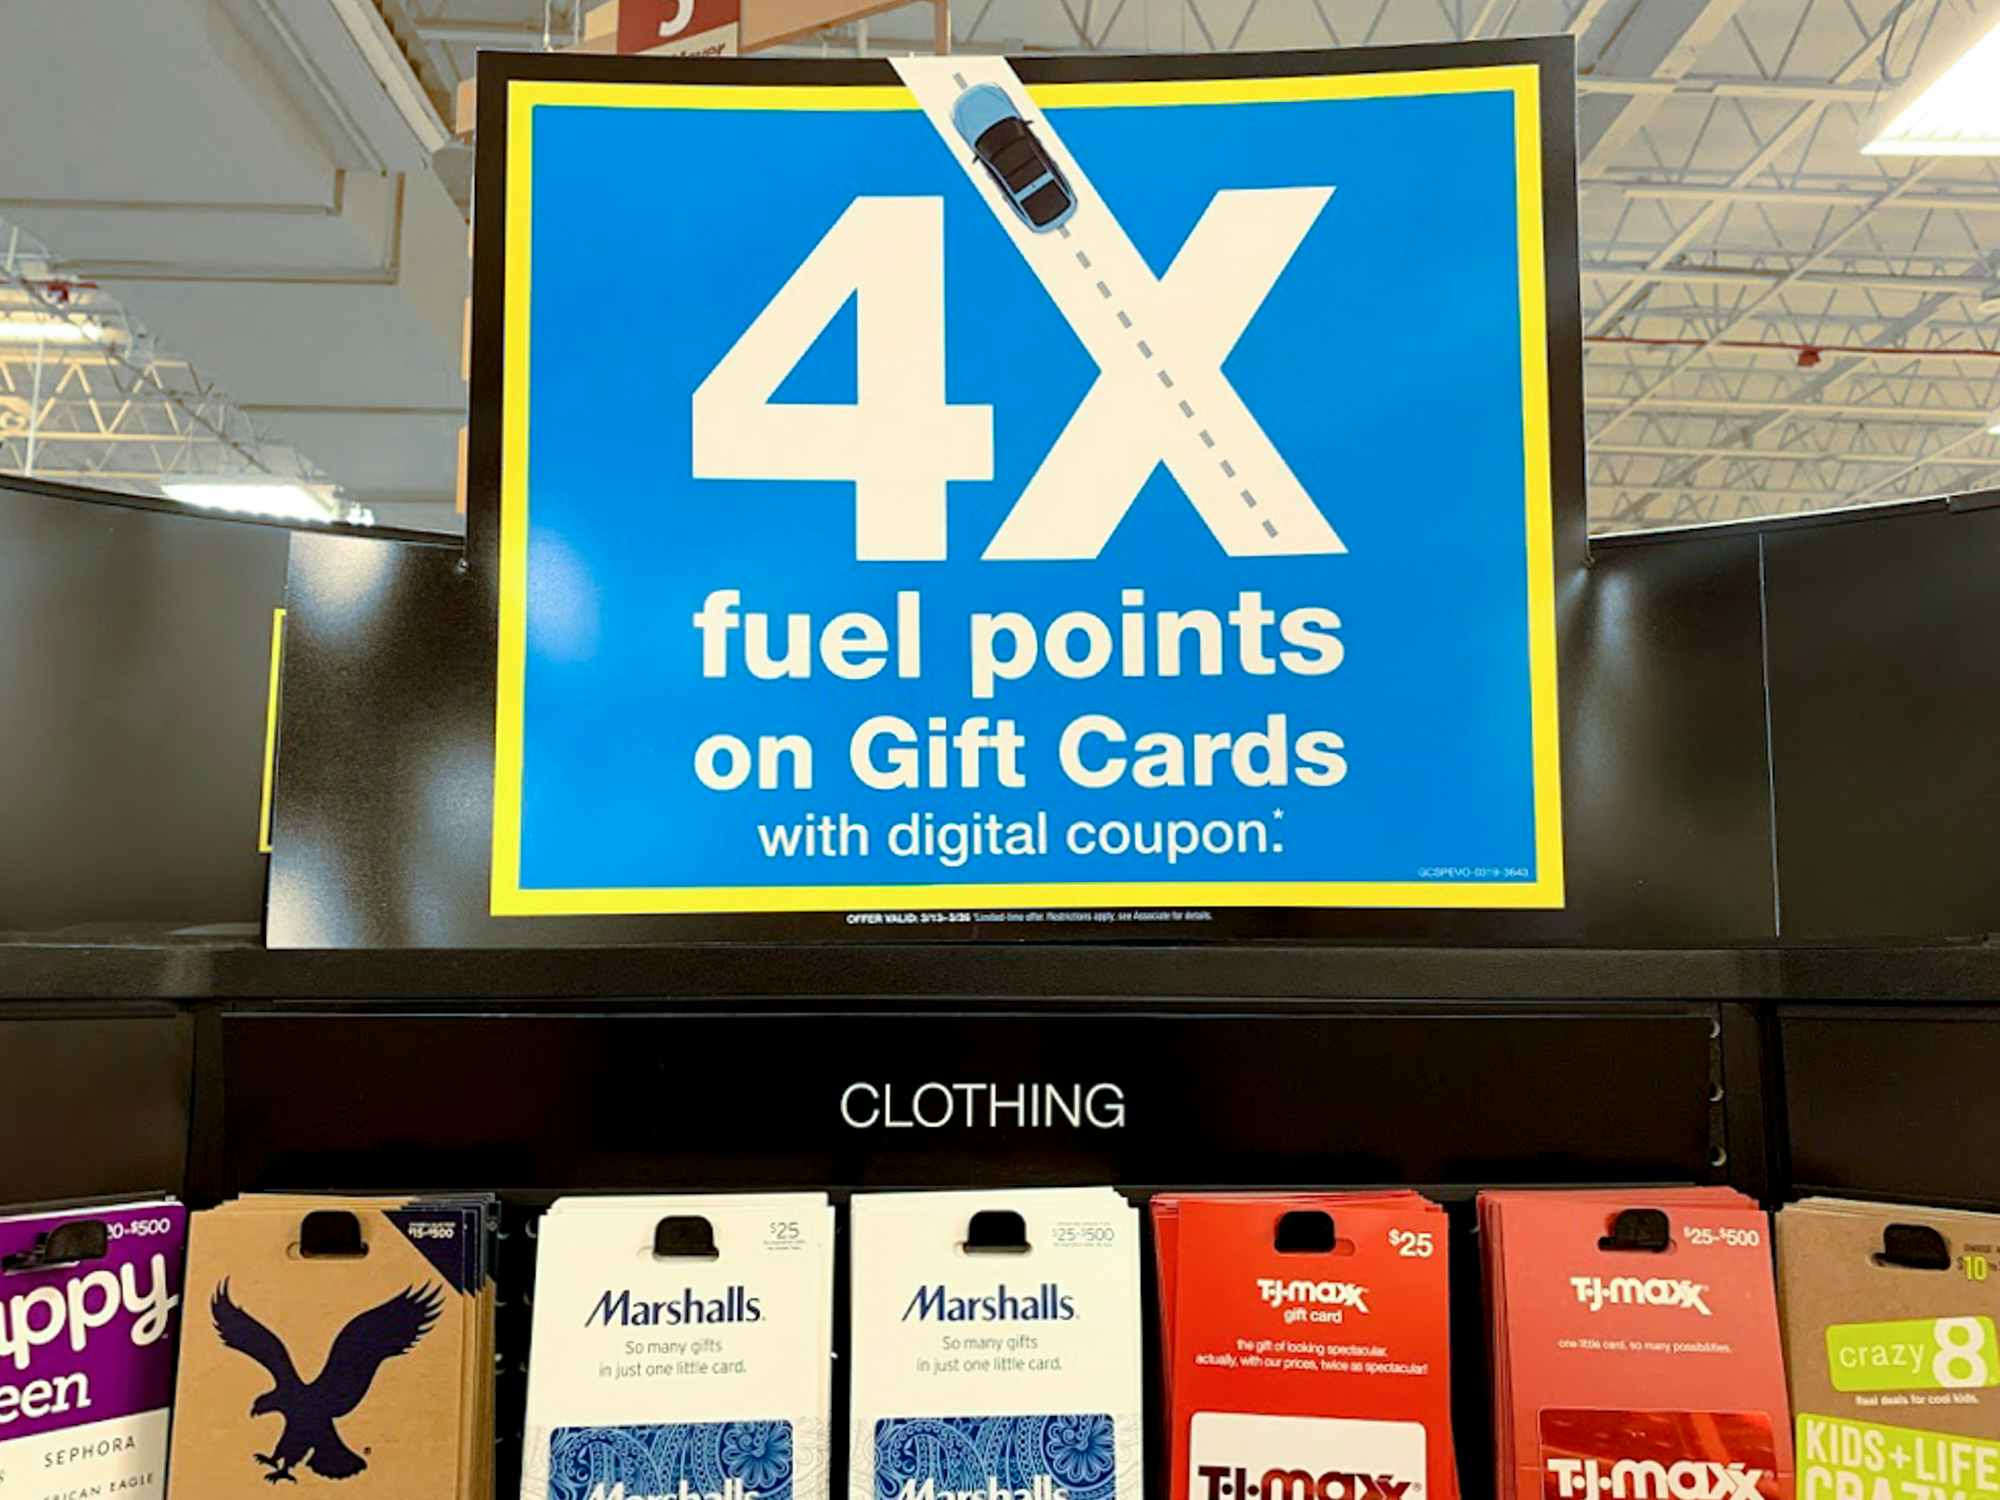 A sign for 4x fuel points on gift card purchases at Kroger